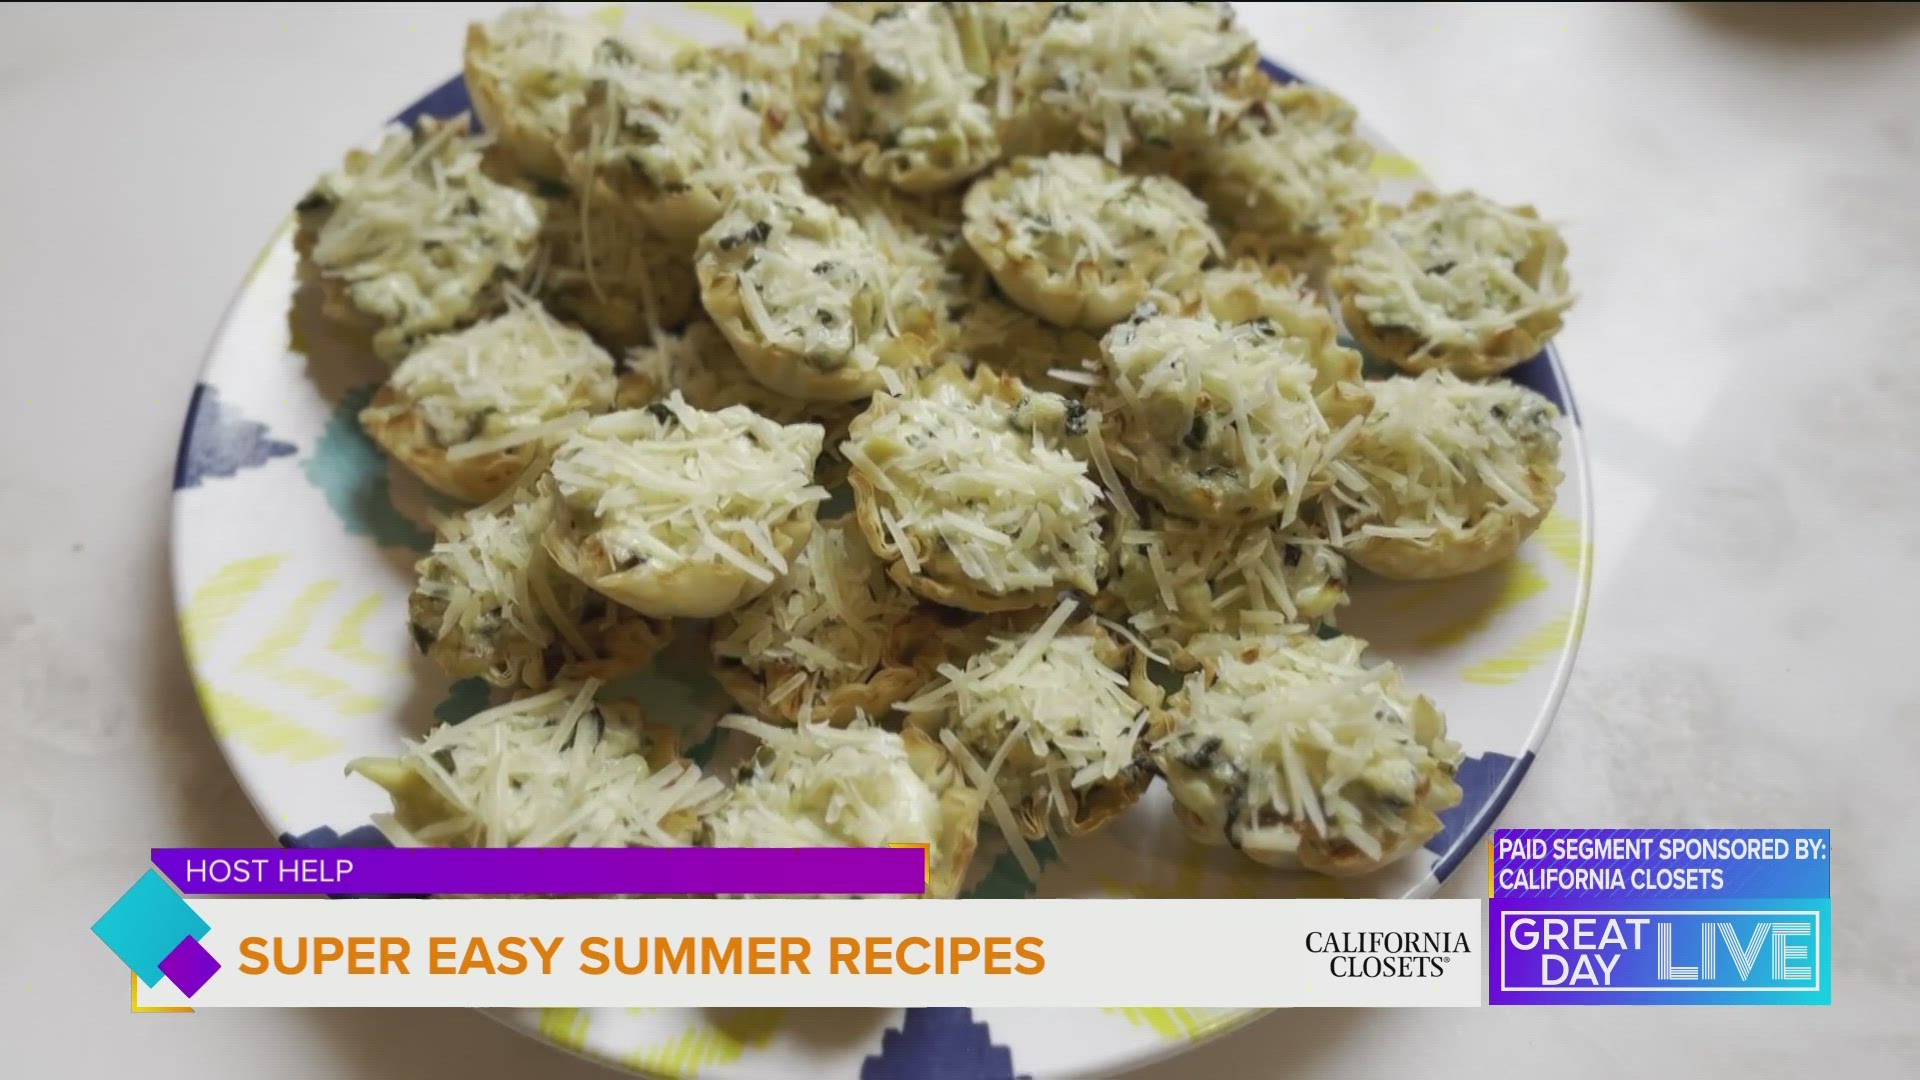 In this week’s Host Help Sponsored by California Closets, Janelle shares two recipes perfect for those lazy summer days.